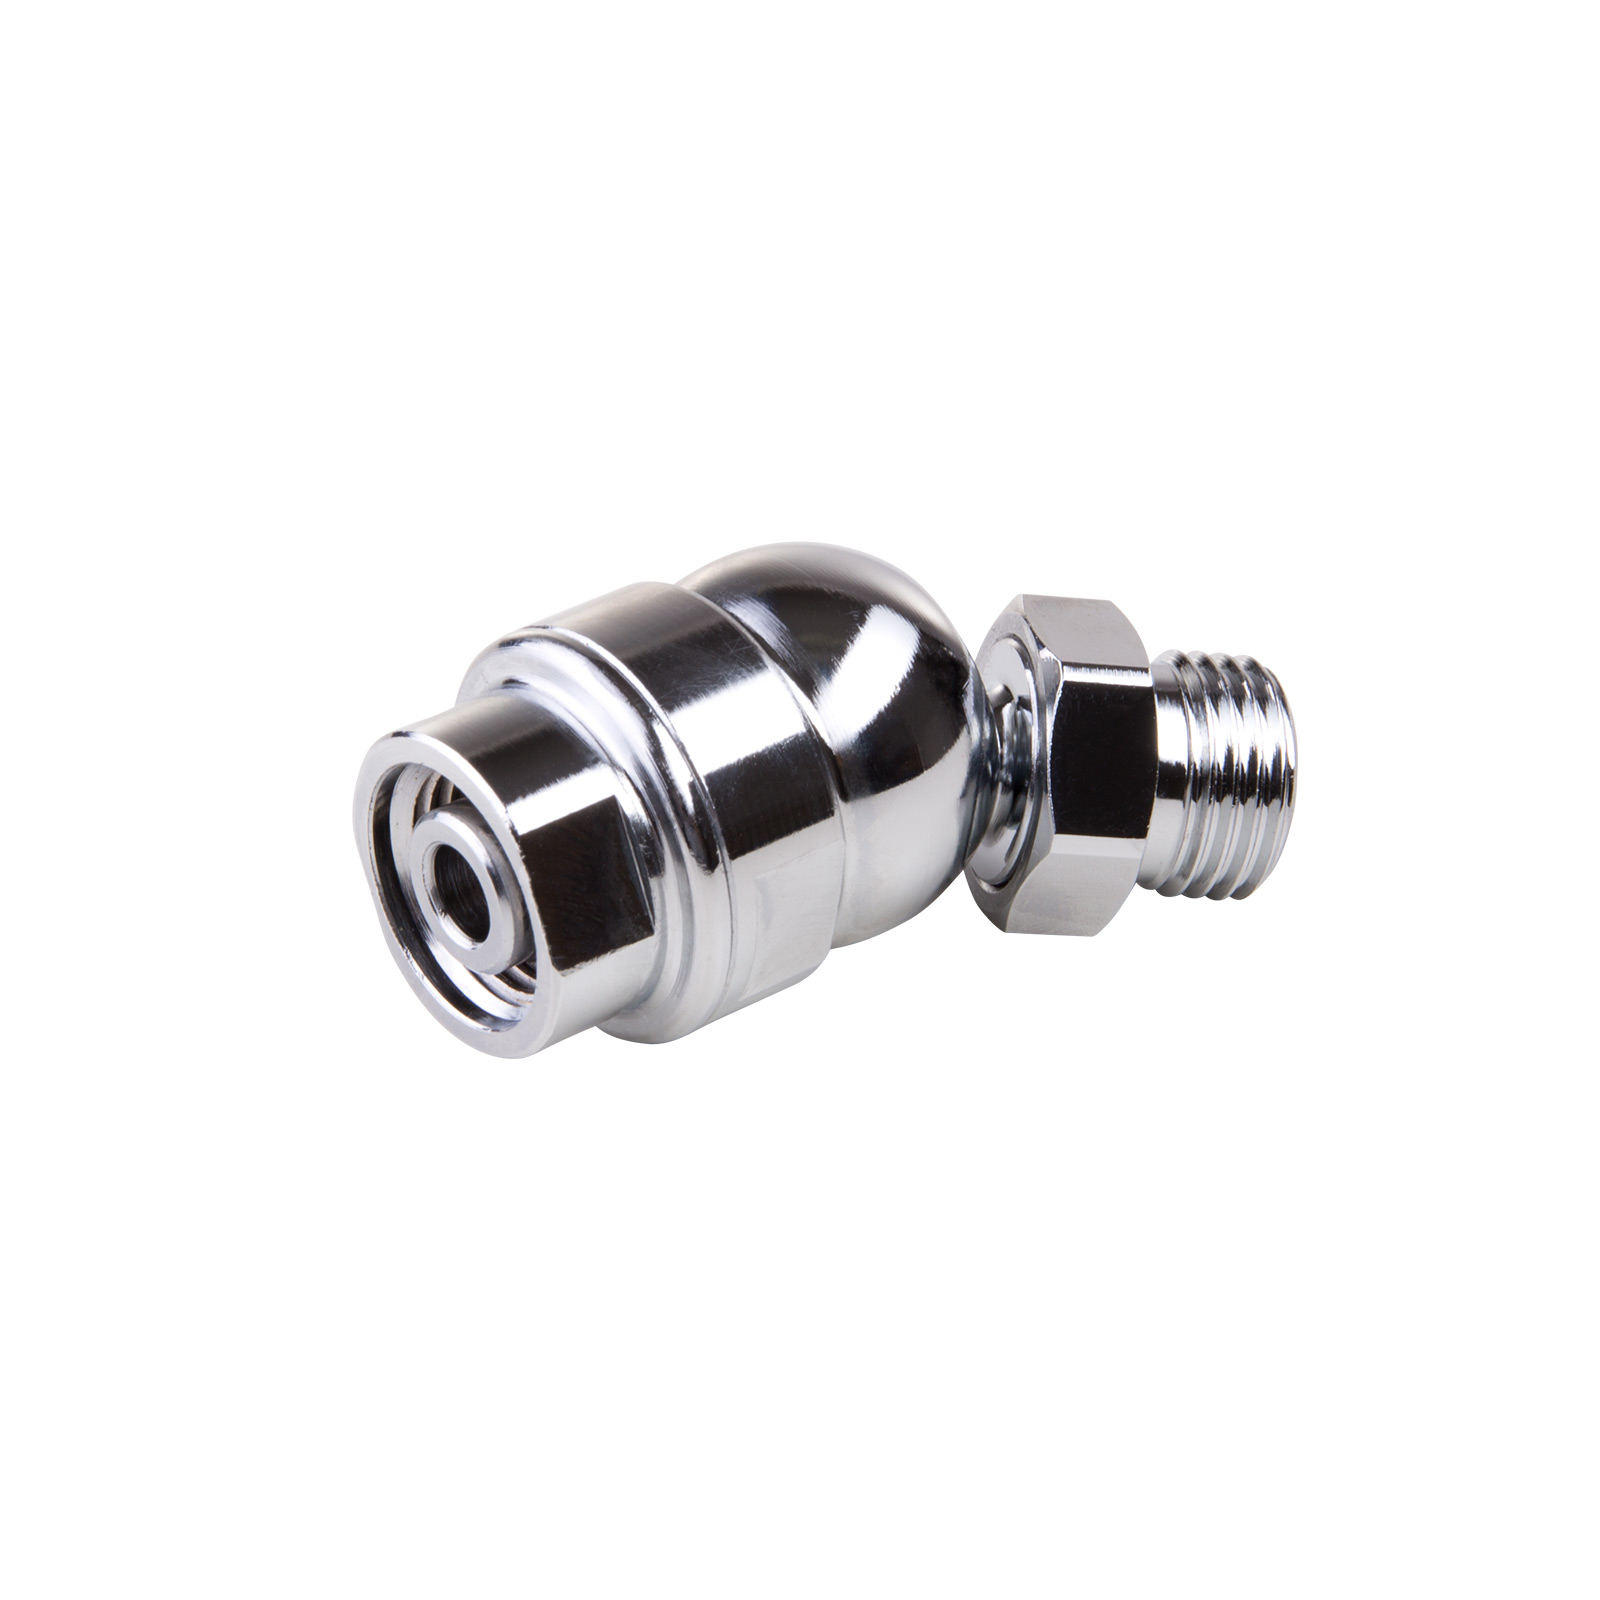 Details about   360 Degree Swivel Hose Adapter for 2nd Stage Scuba Diving Regulator Adapter 